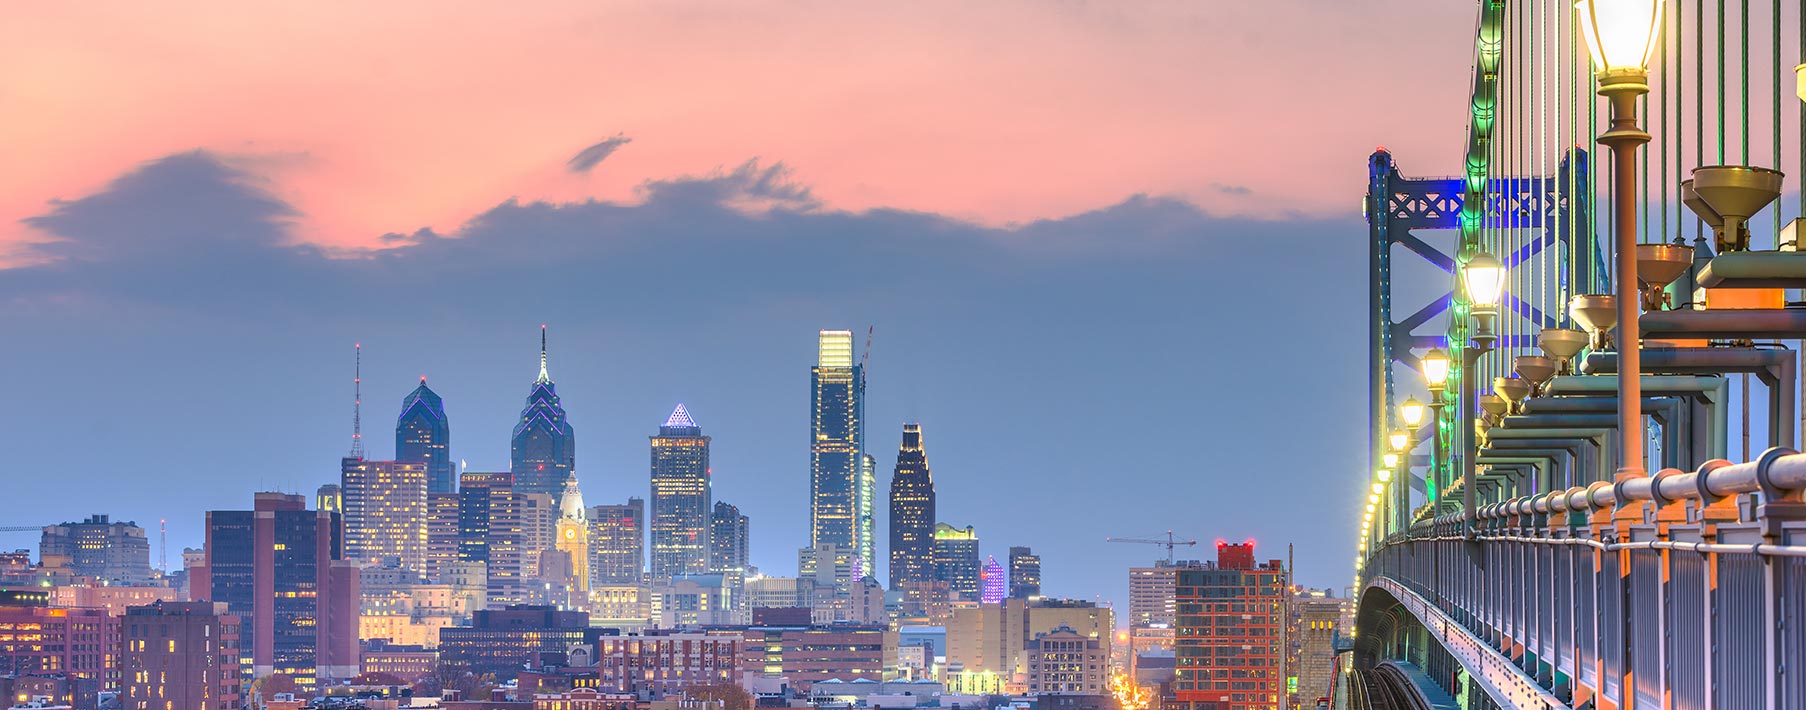 Image of the Philly skyline with a bridge on the right hand side